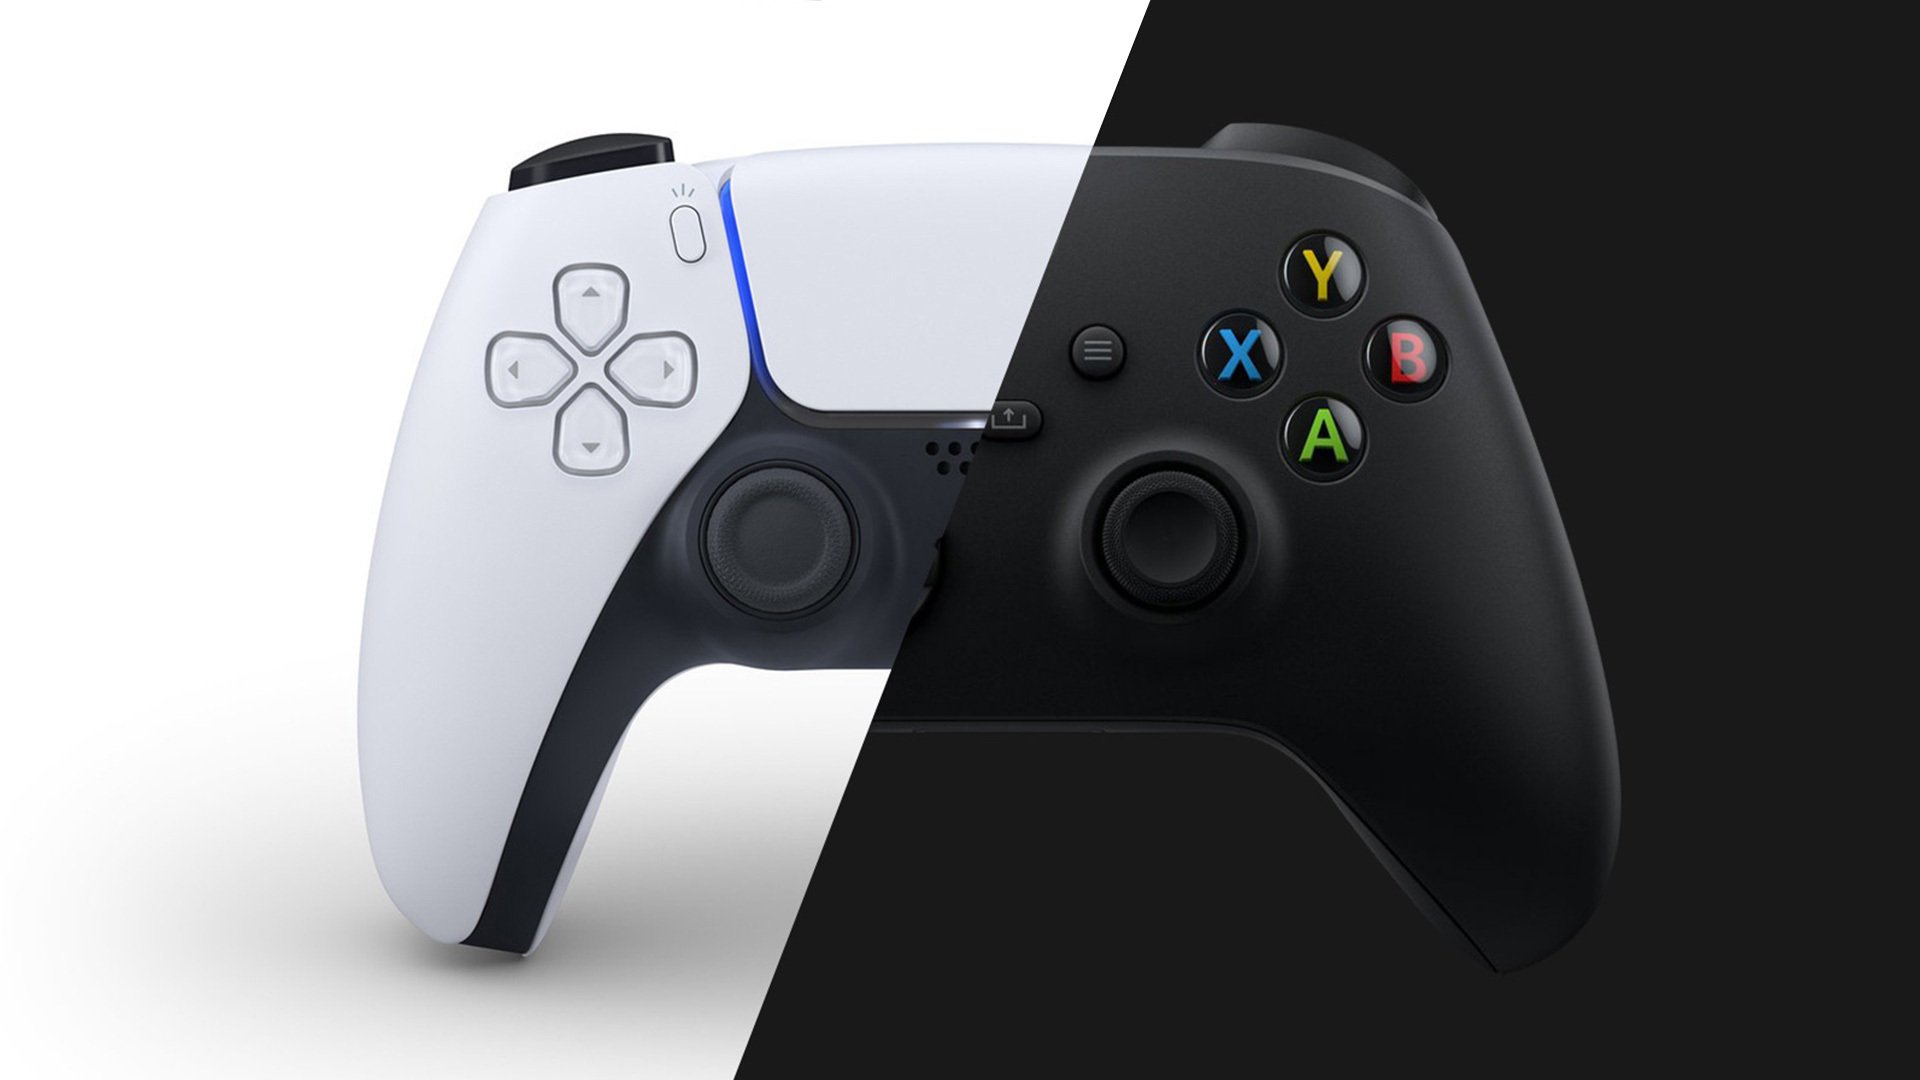 PS5 Digital Edition vs Xbox Series S: which digital-only console should you  buy?